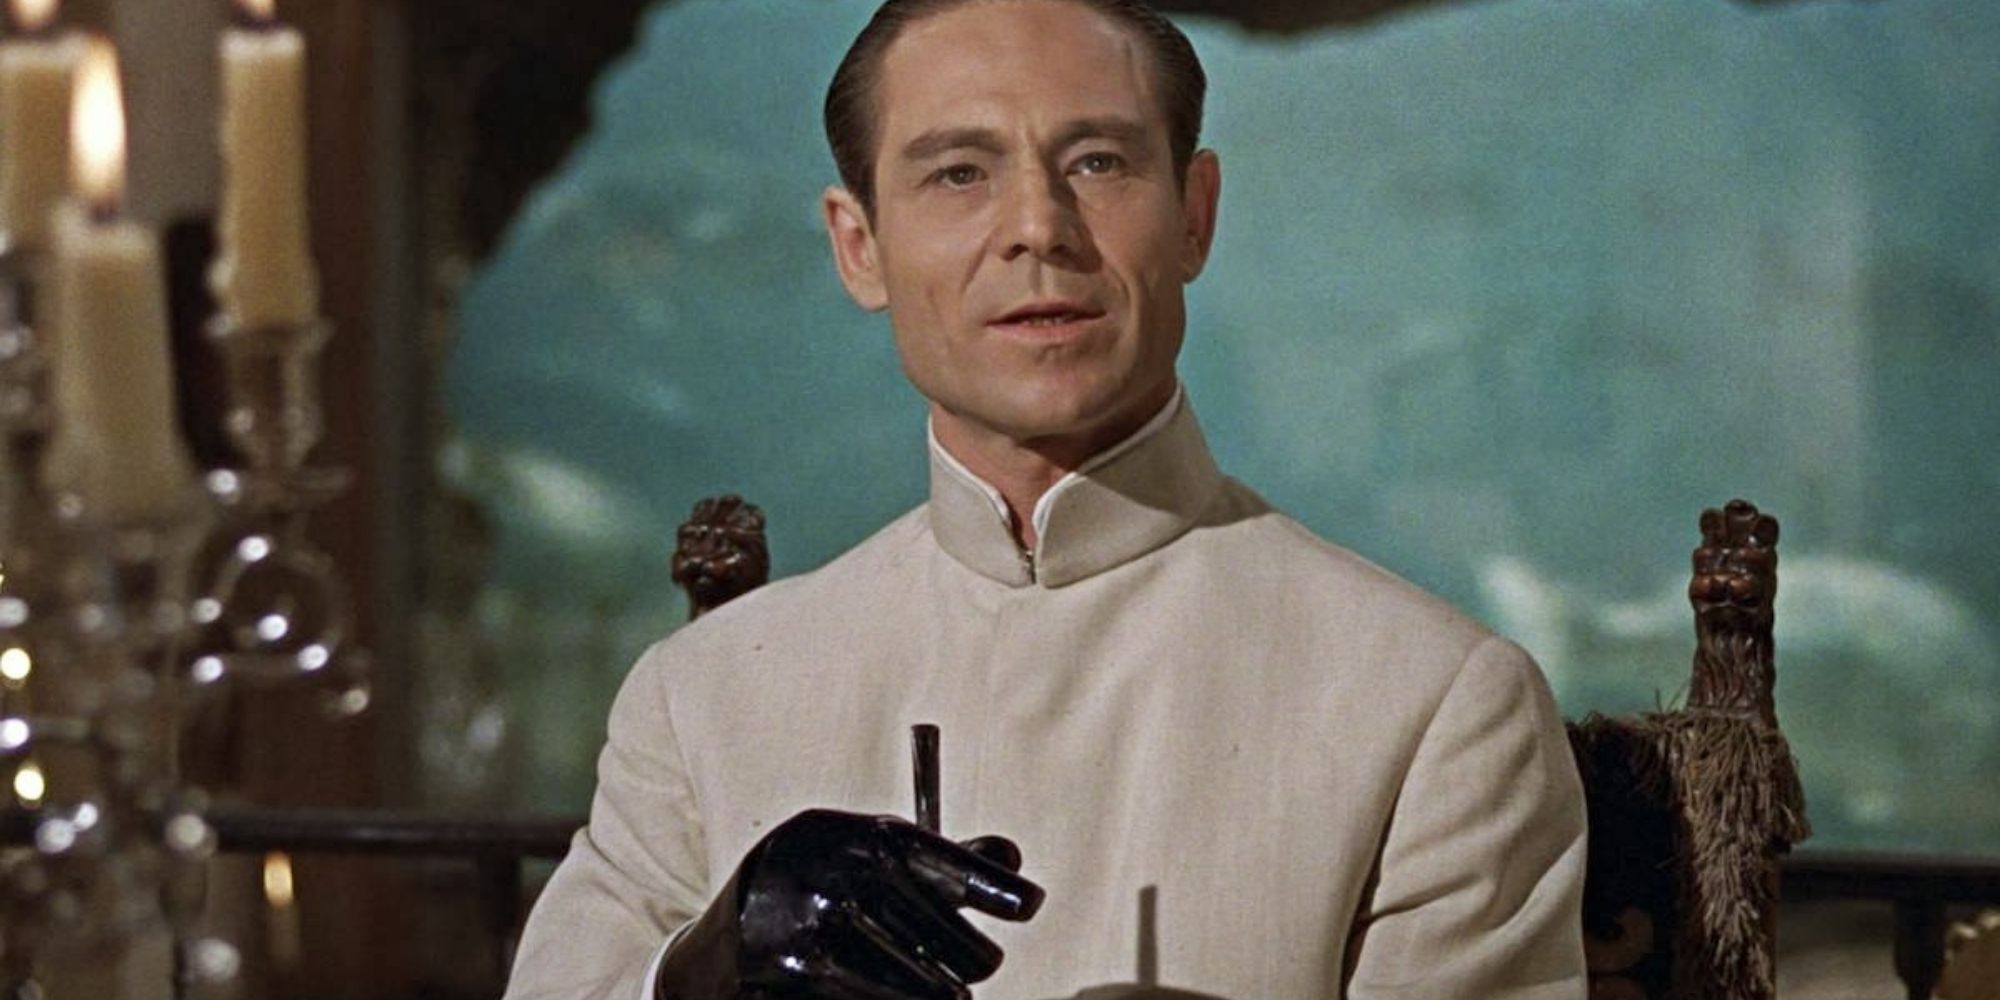 Dr. No from "Dr. No"